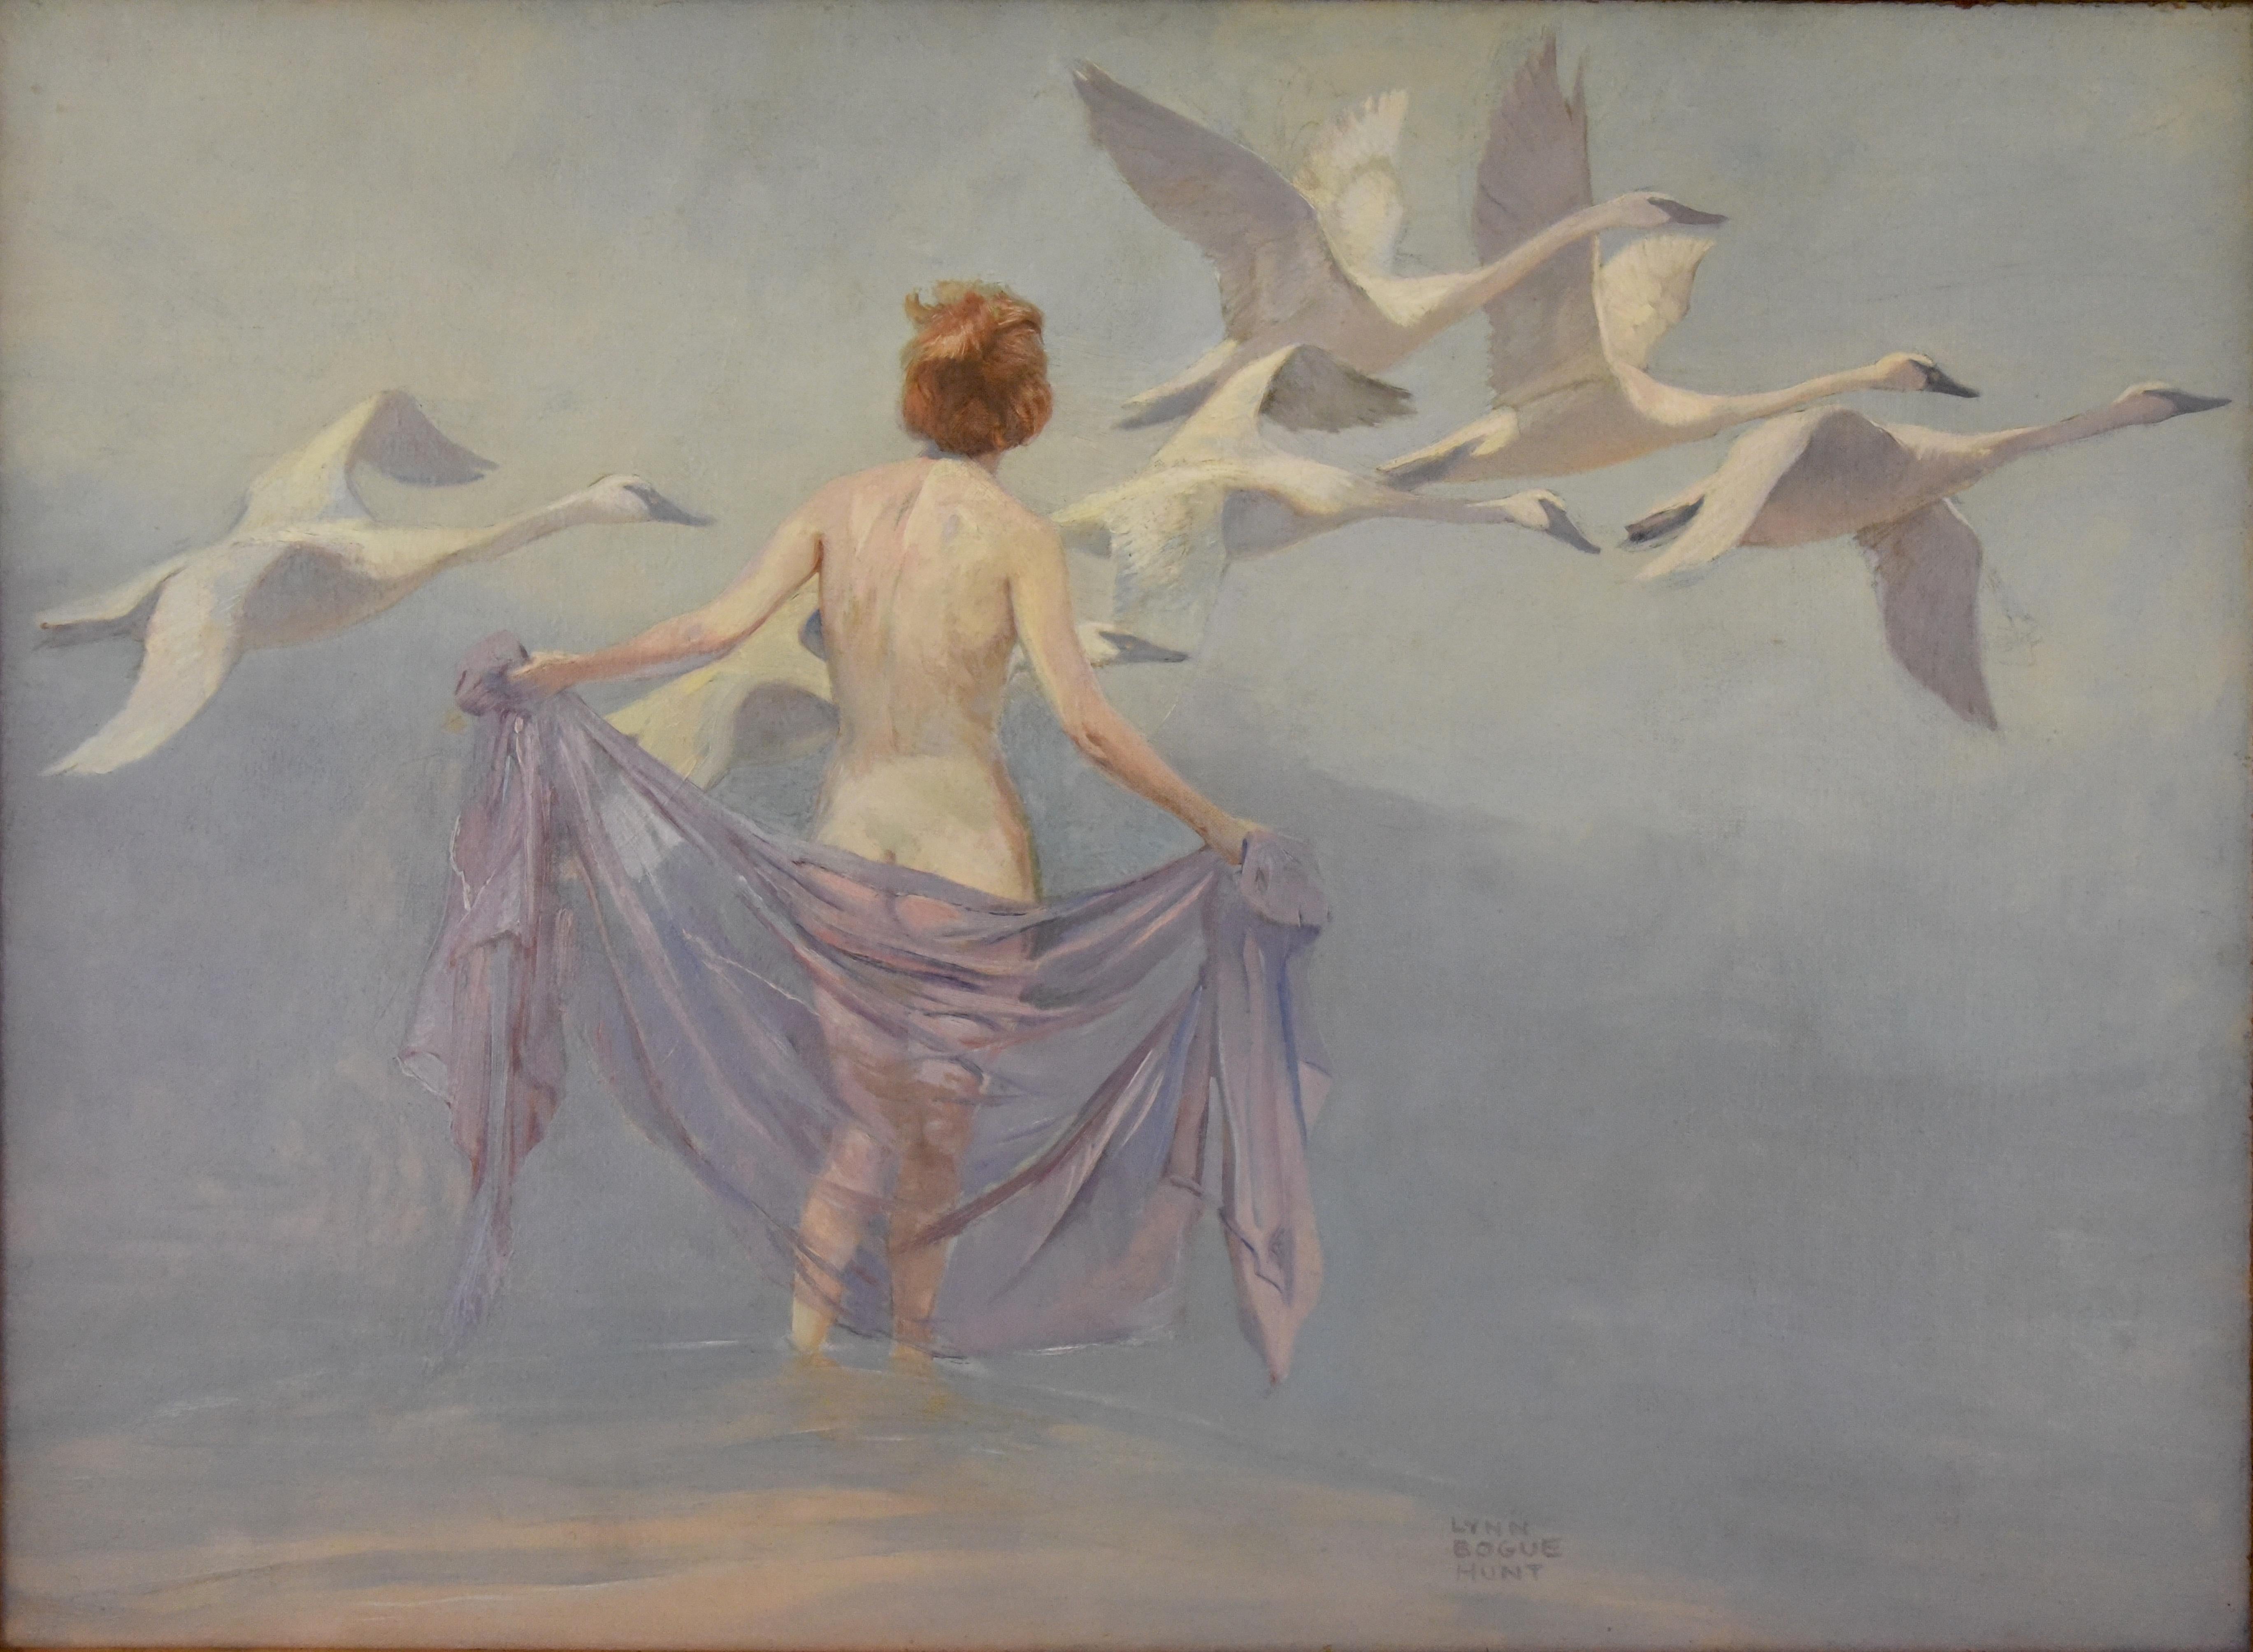 Nude with swans. 
Art Deco painting by the famous American artist Lynn Bogue Hunt. 
Oil on canvas, framed, circa 1920-1930.
Beautiful soft pastel shades. 
Provenance: Berko Gallery Fine arts.
Size of the frame: 
H. 65 cm x L. 85 cm. x. W. 4